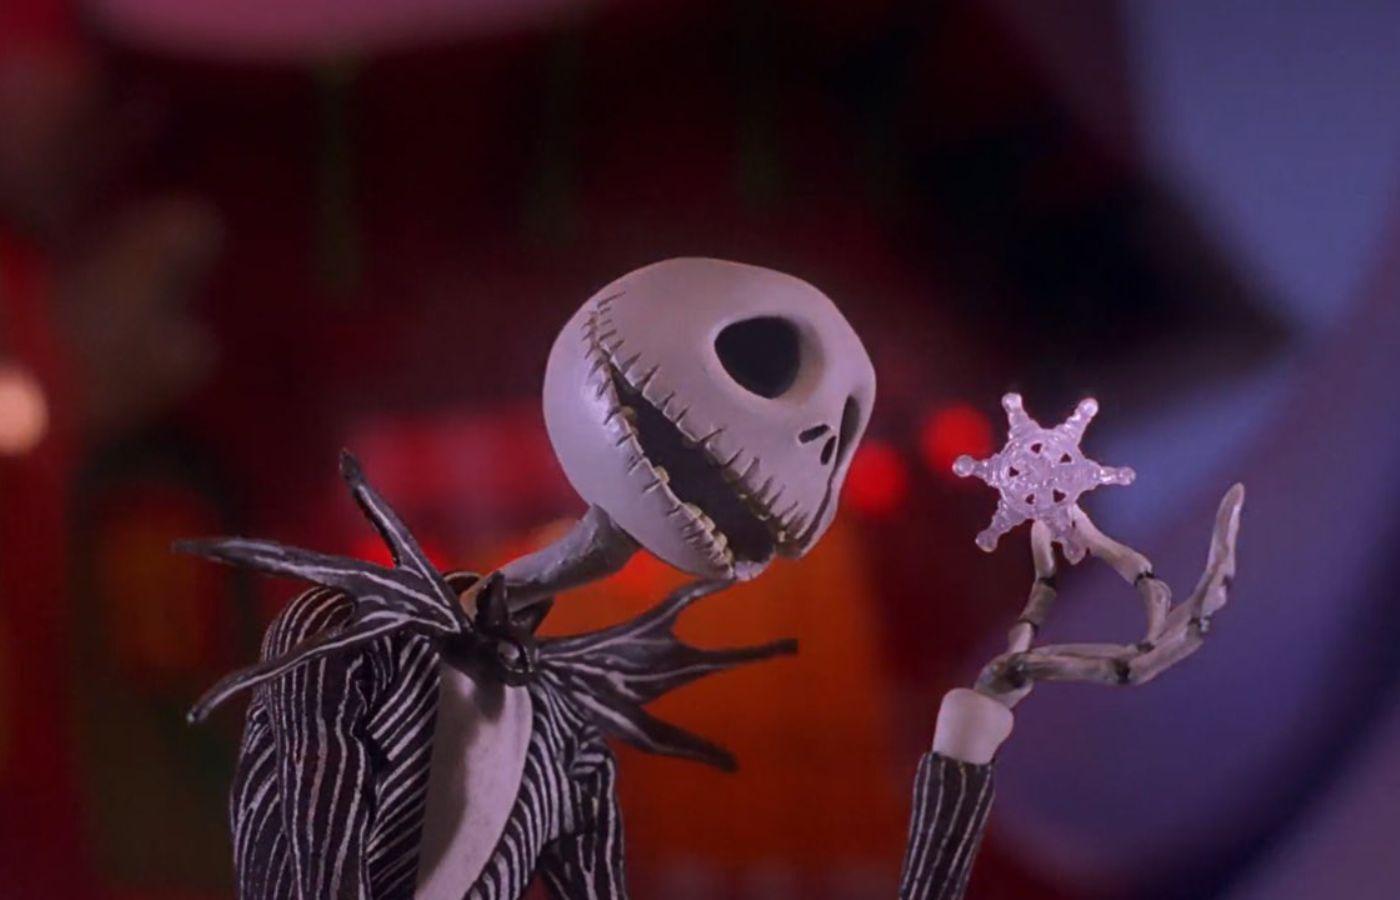 Is The Nightmare Before Christmas a Halloween movie?